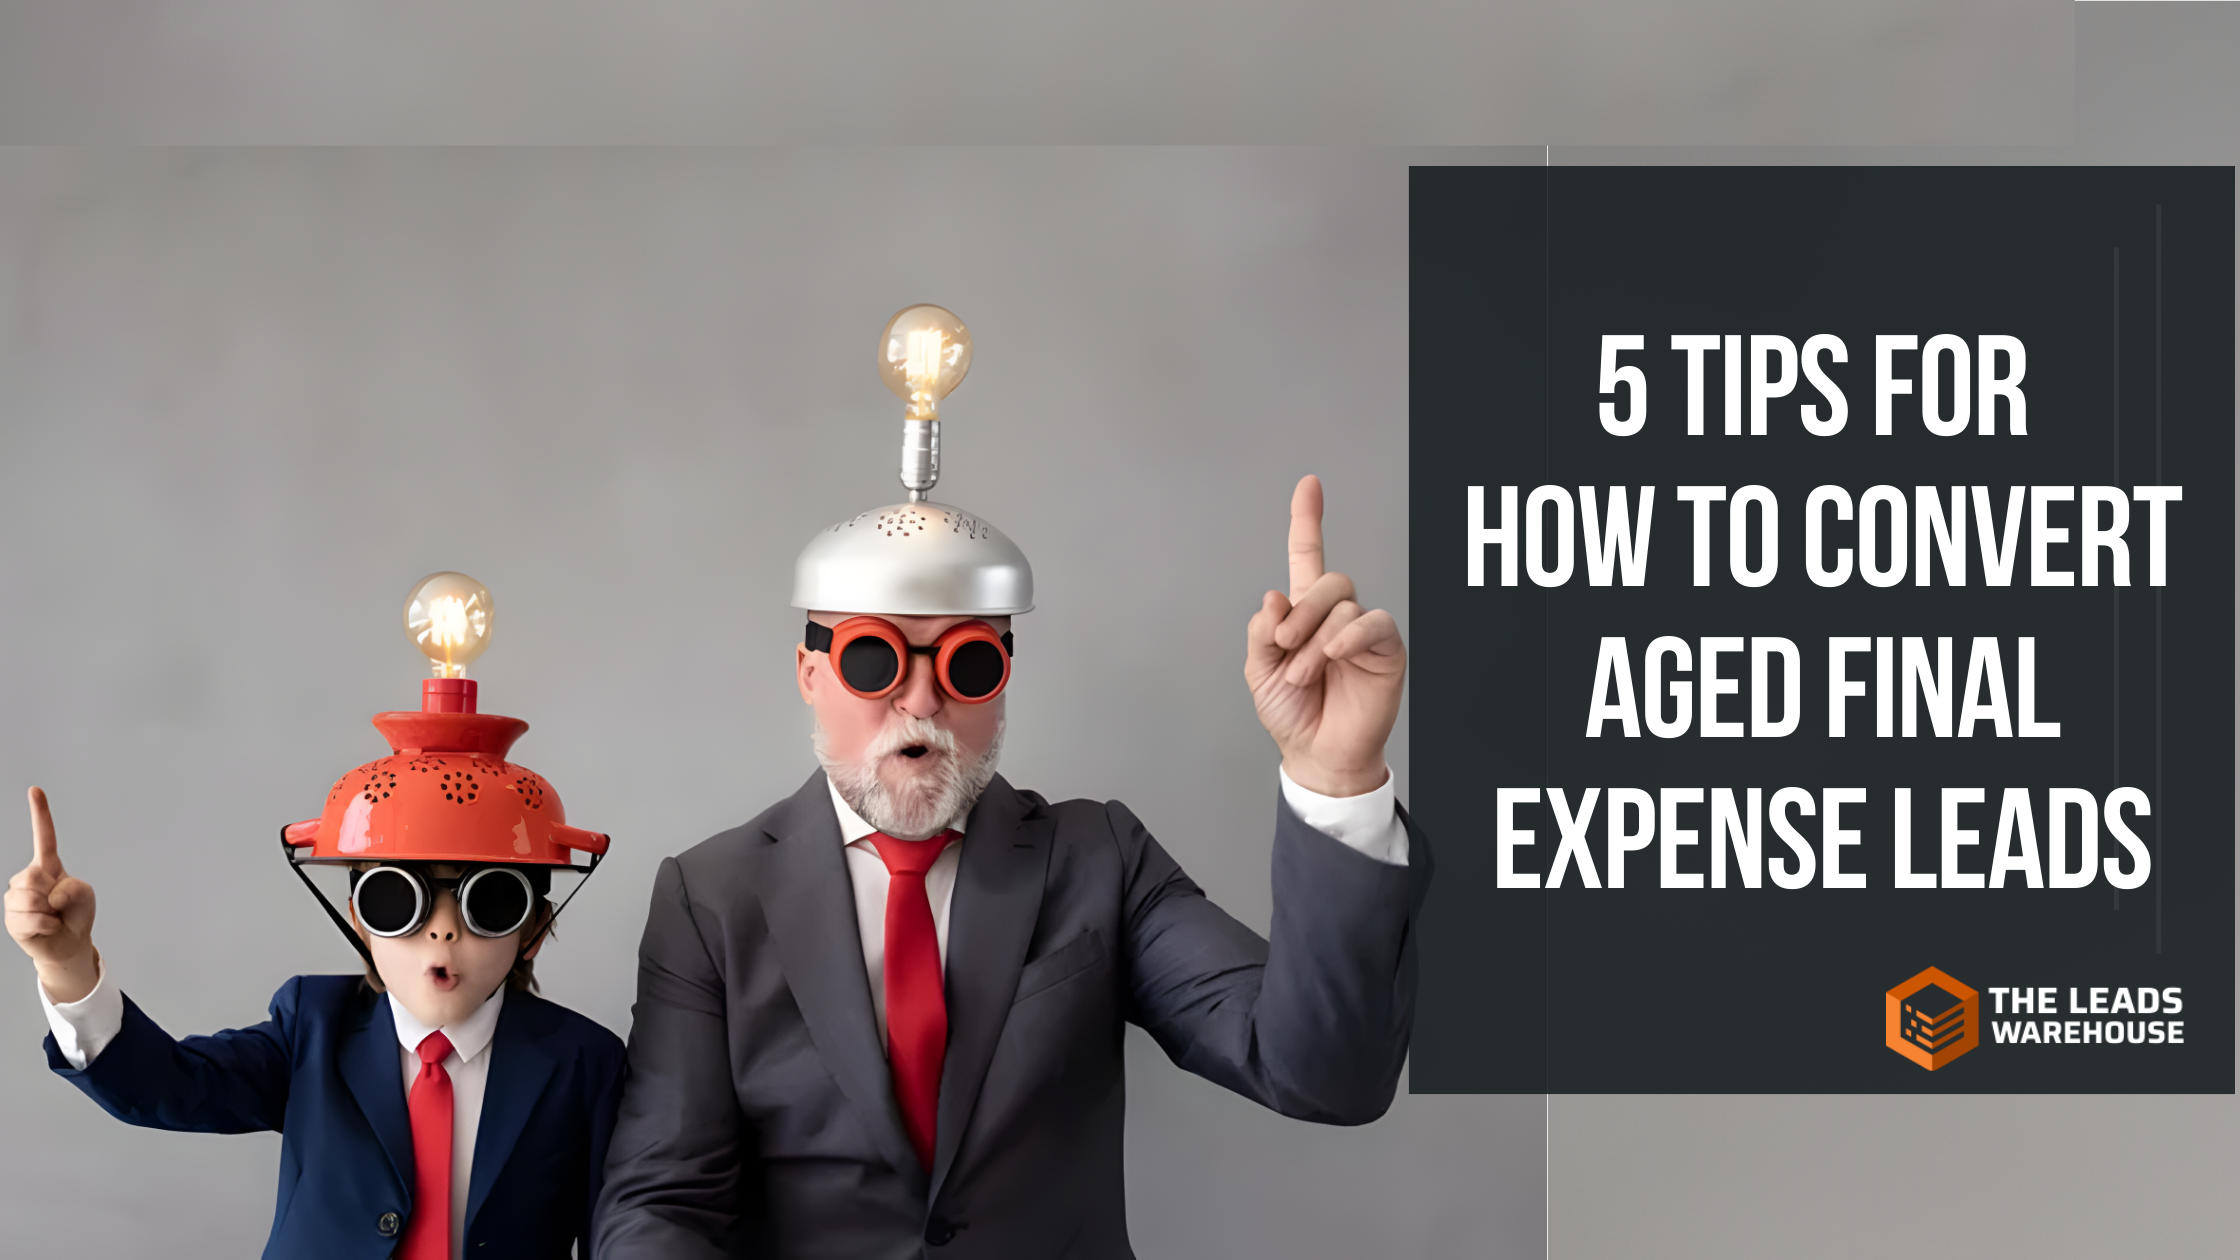 Convert Aged Final Expense Leads | 5 Tips